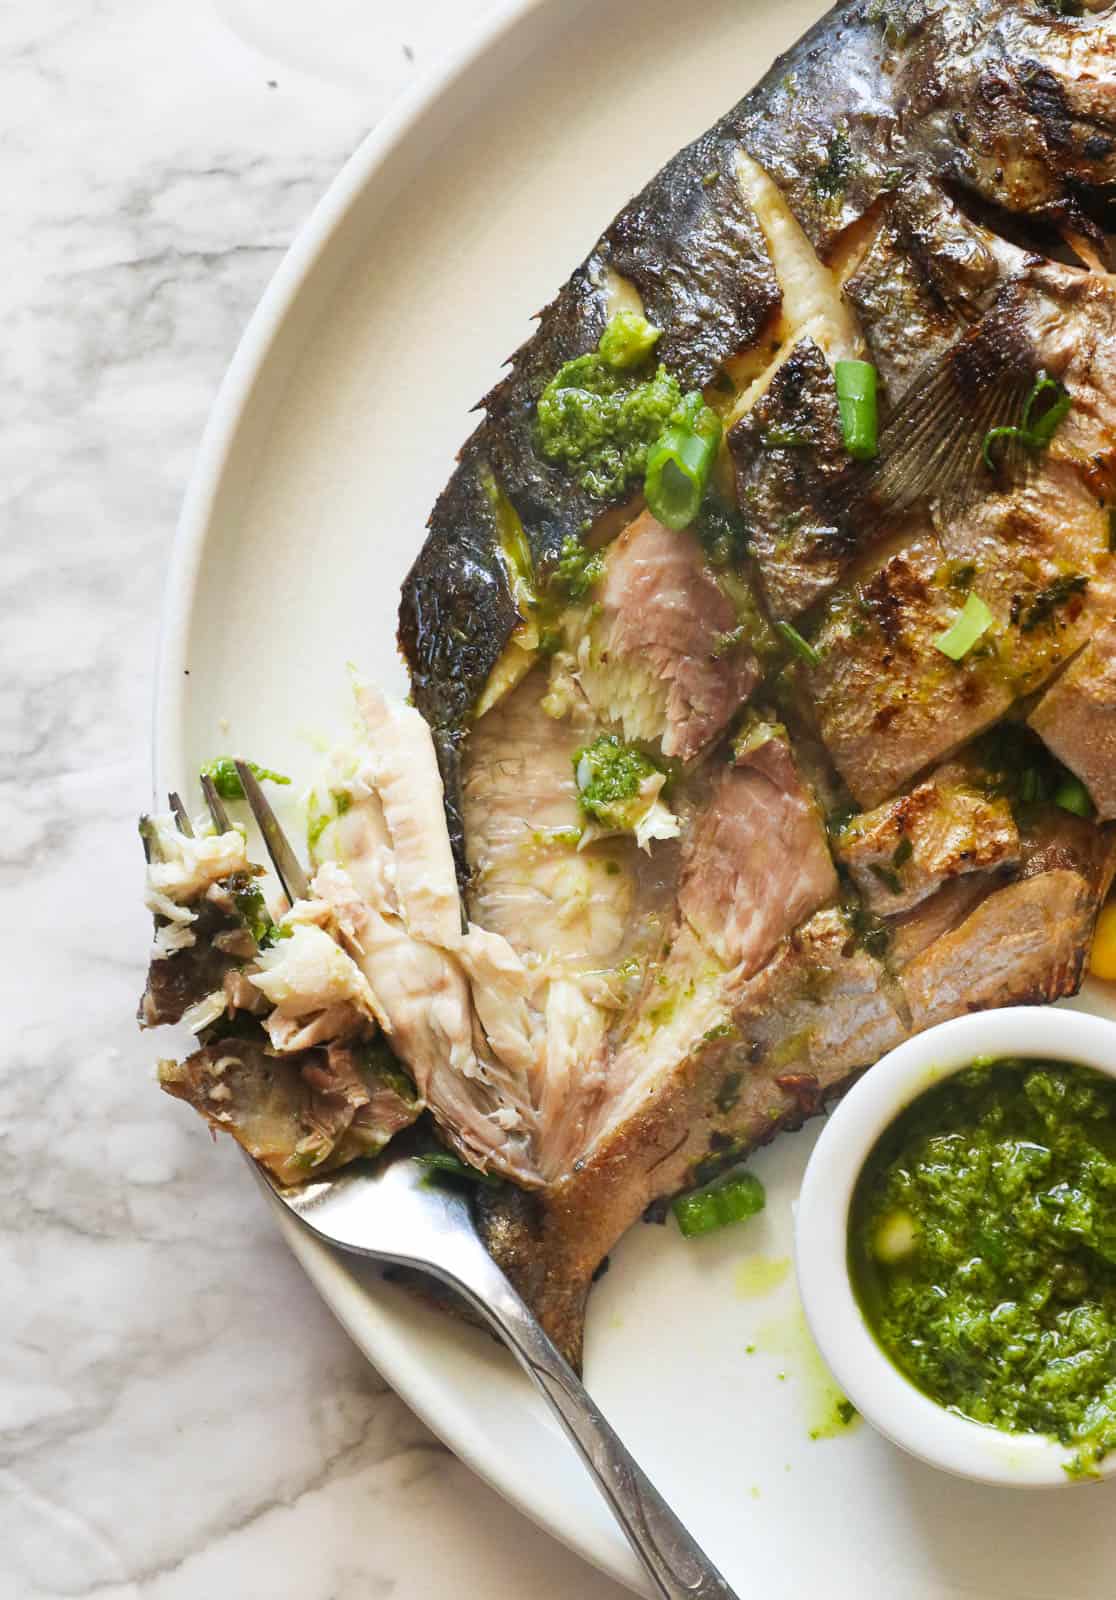 Grilled Pompano Fish can garnish it with sliced lemon and parsley